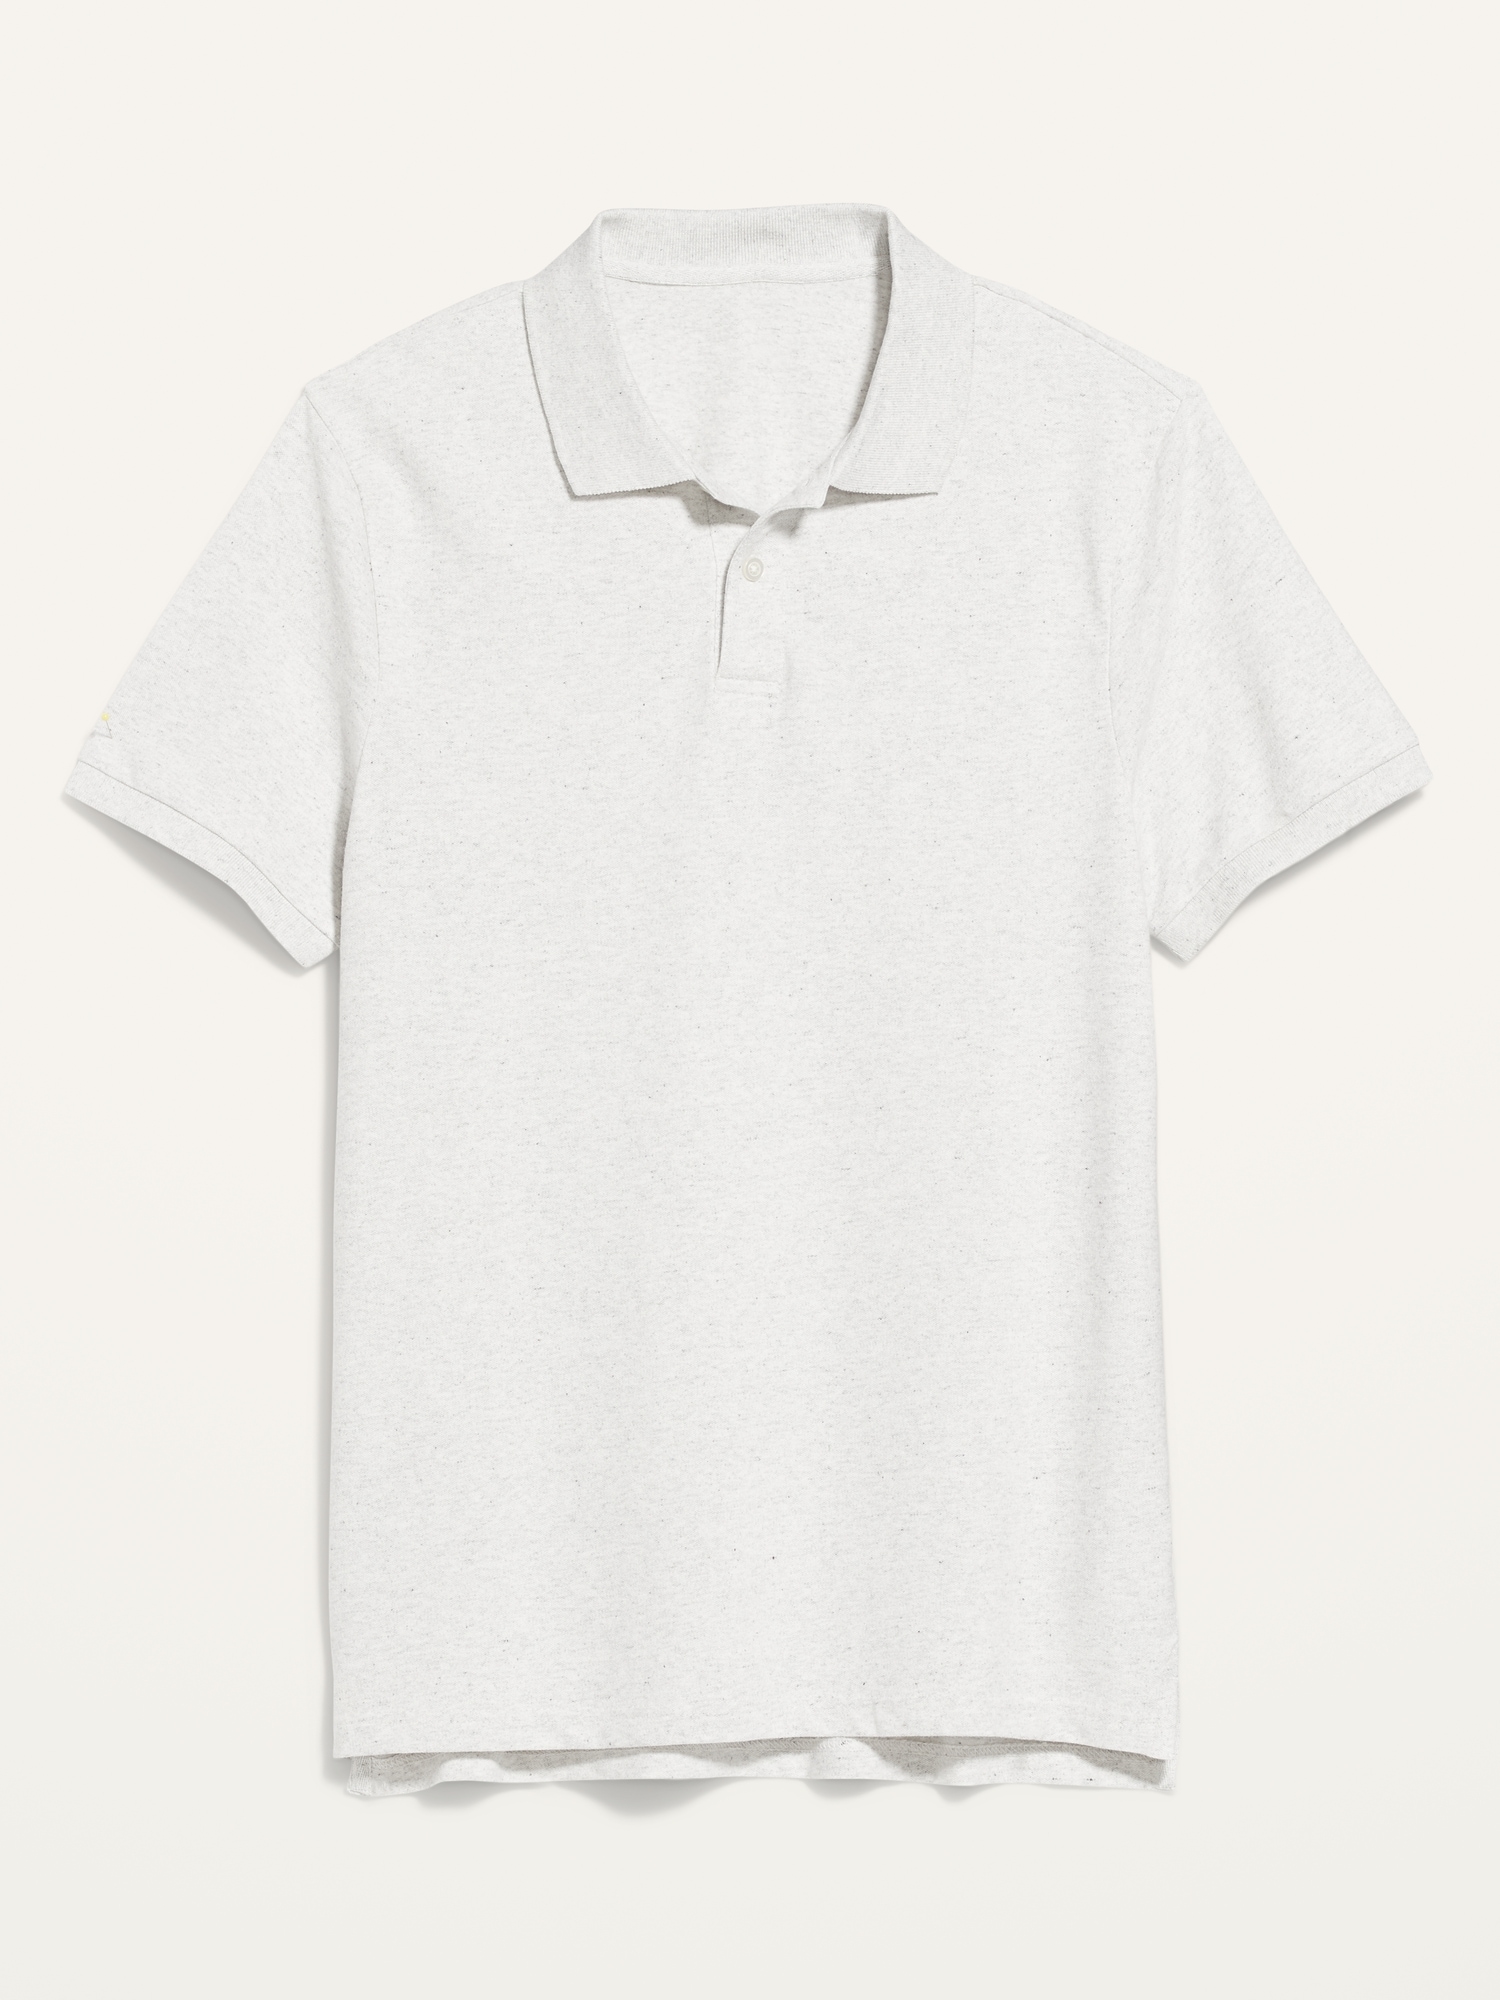 Classic Fit Heathered Pique Polo for Men | Old Navy